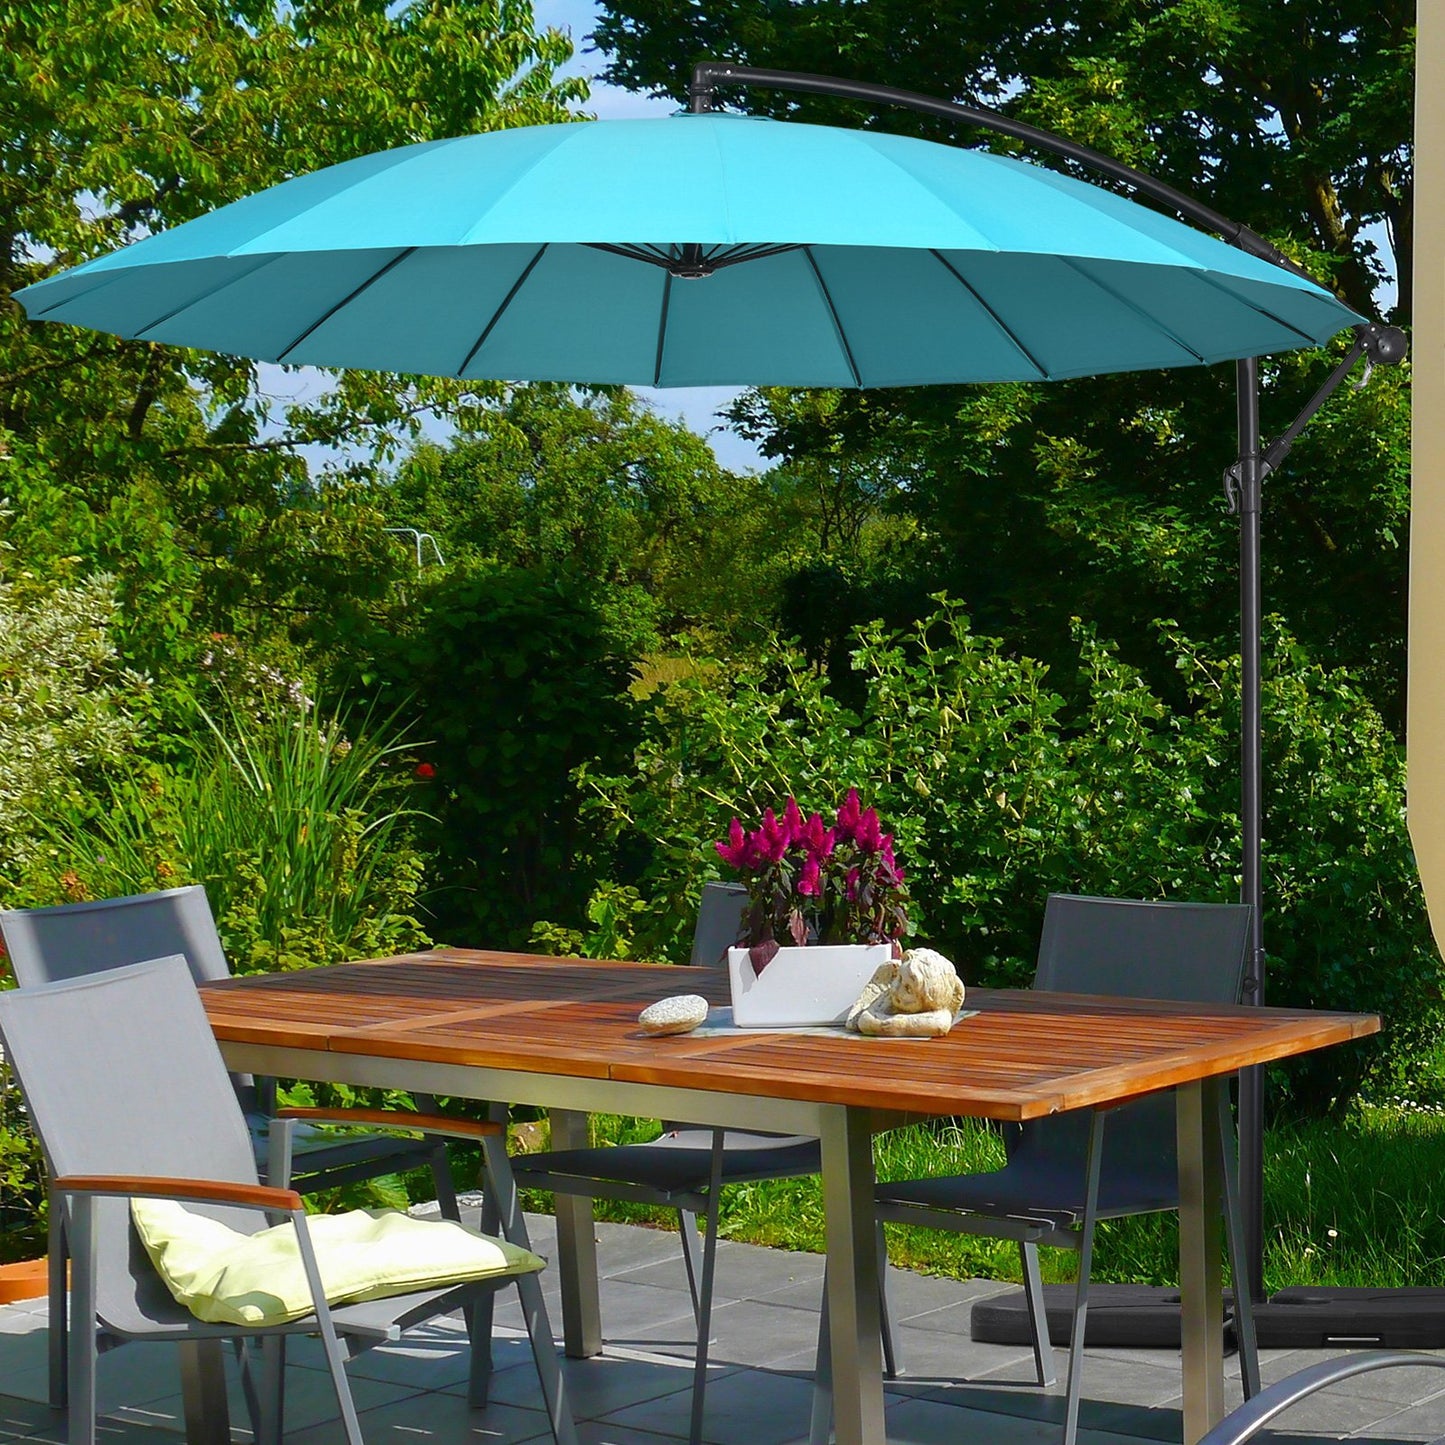 Outsunny 3(m) Cantilever Umbrella 18 Ribs & Vents Adjustable Angle for Patio Green